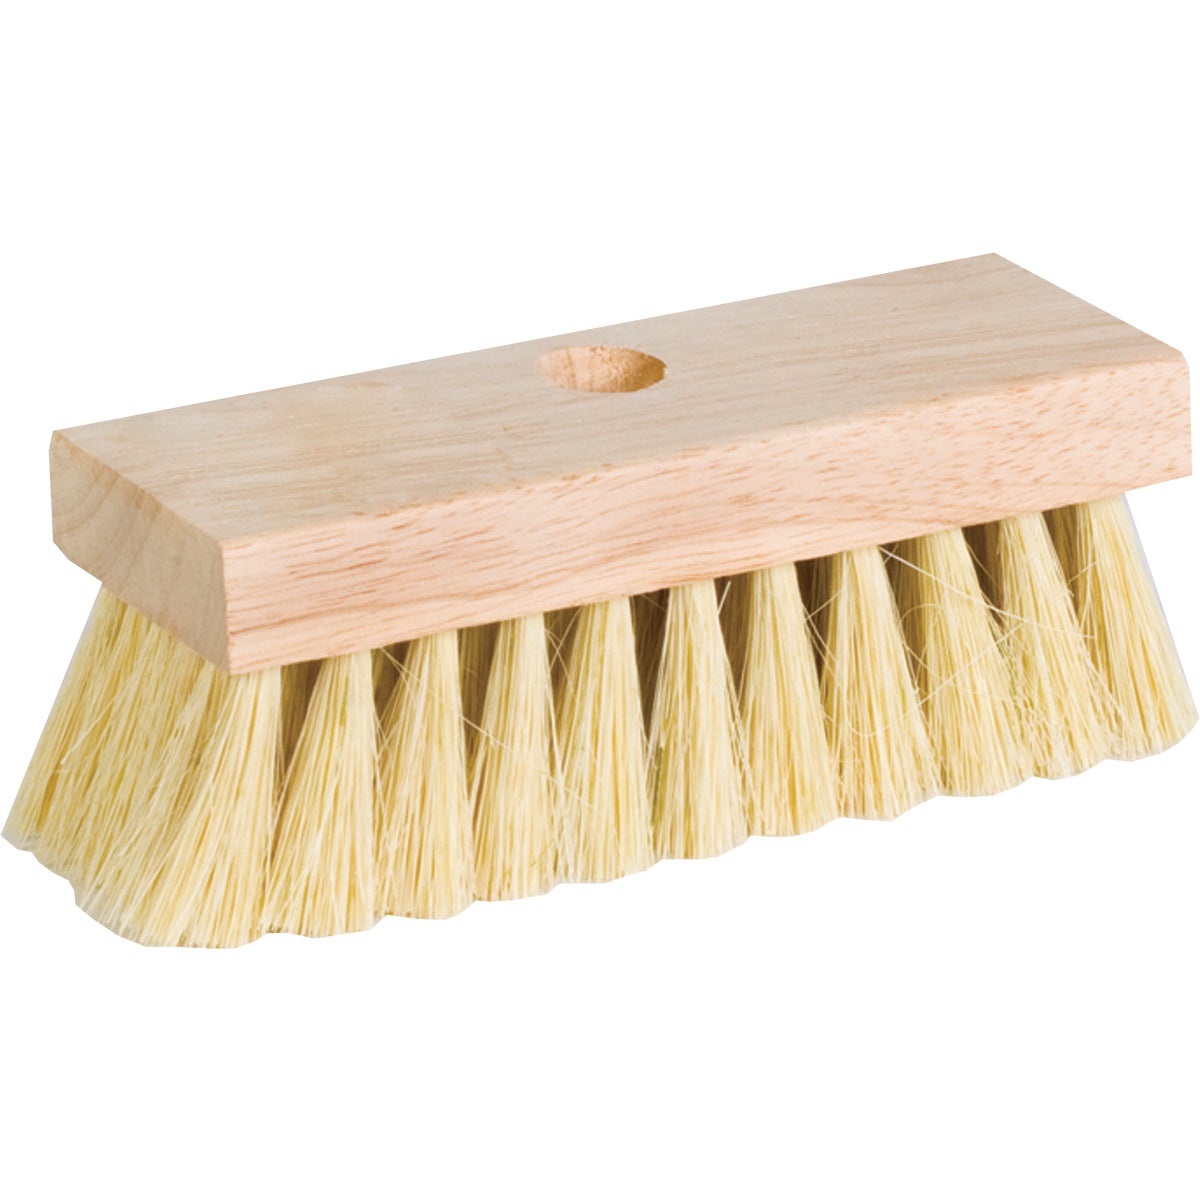 Item 772257, Popular and economical lightweight brushes designed for coating roofs, as 